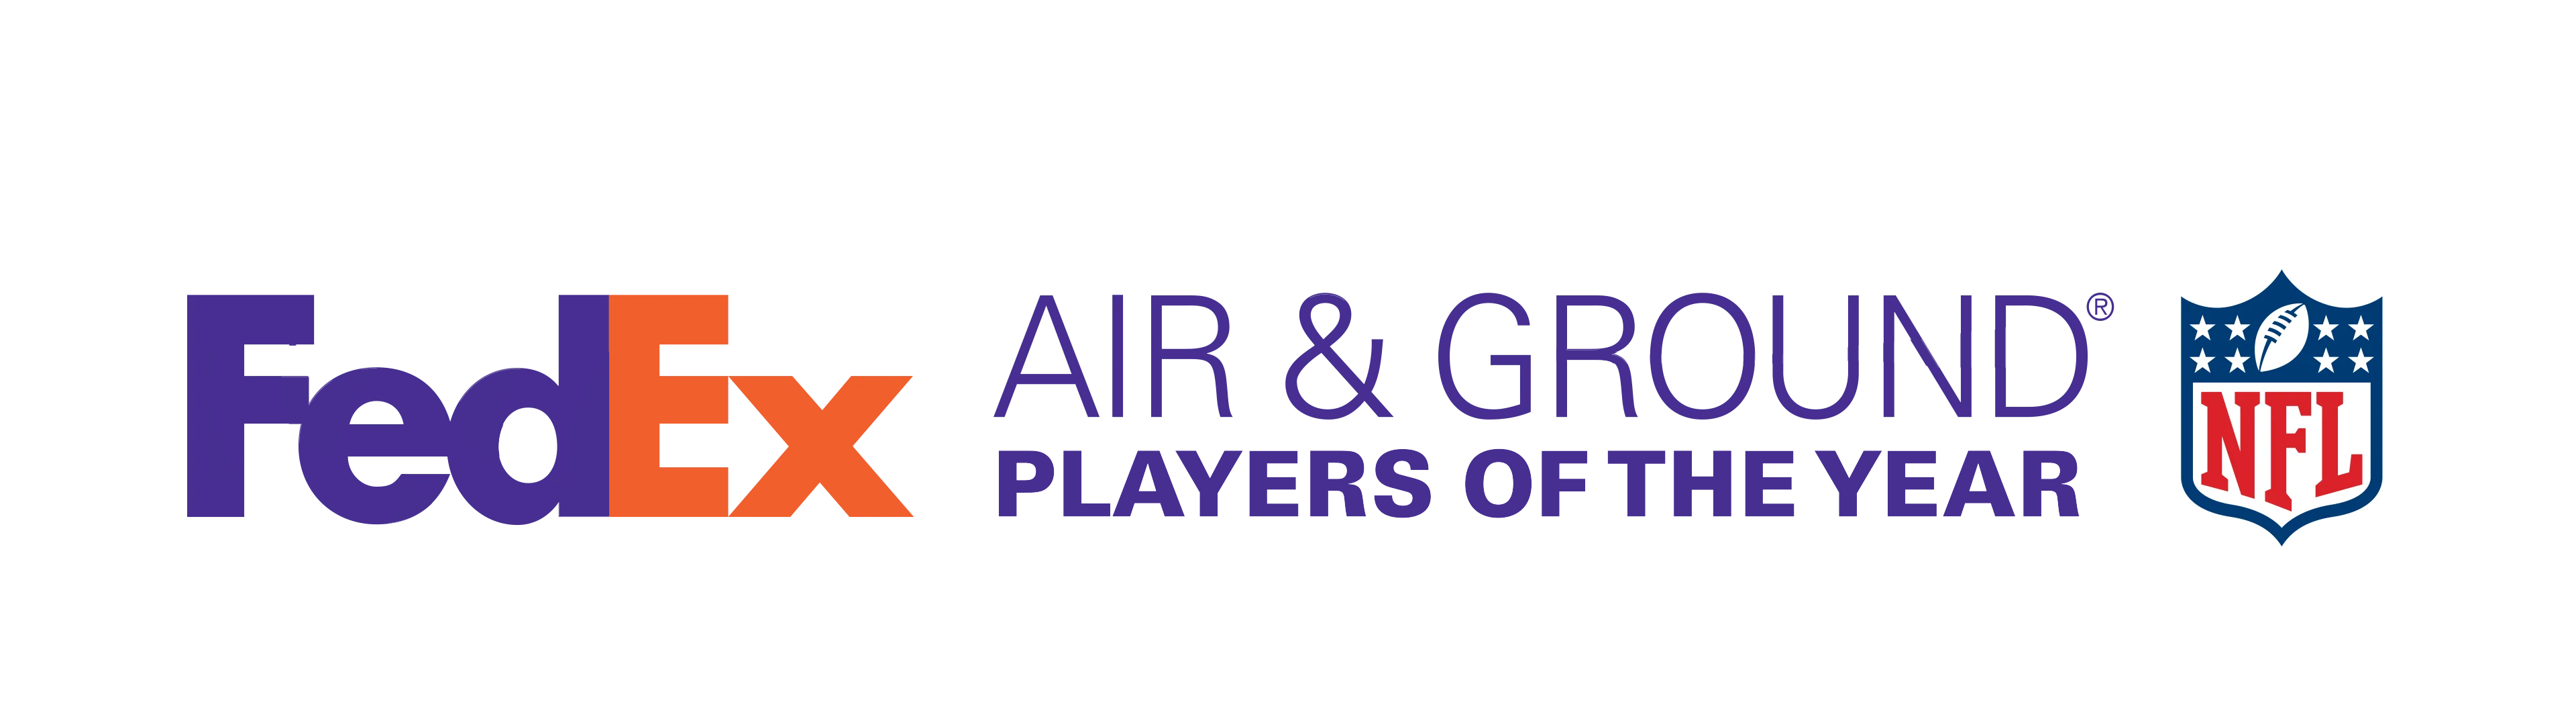 FedEx Air and Ground Player of the Year